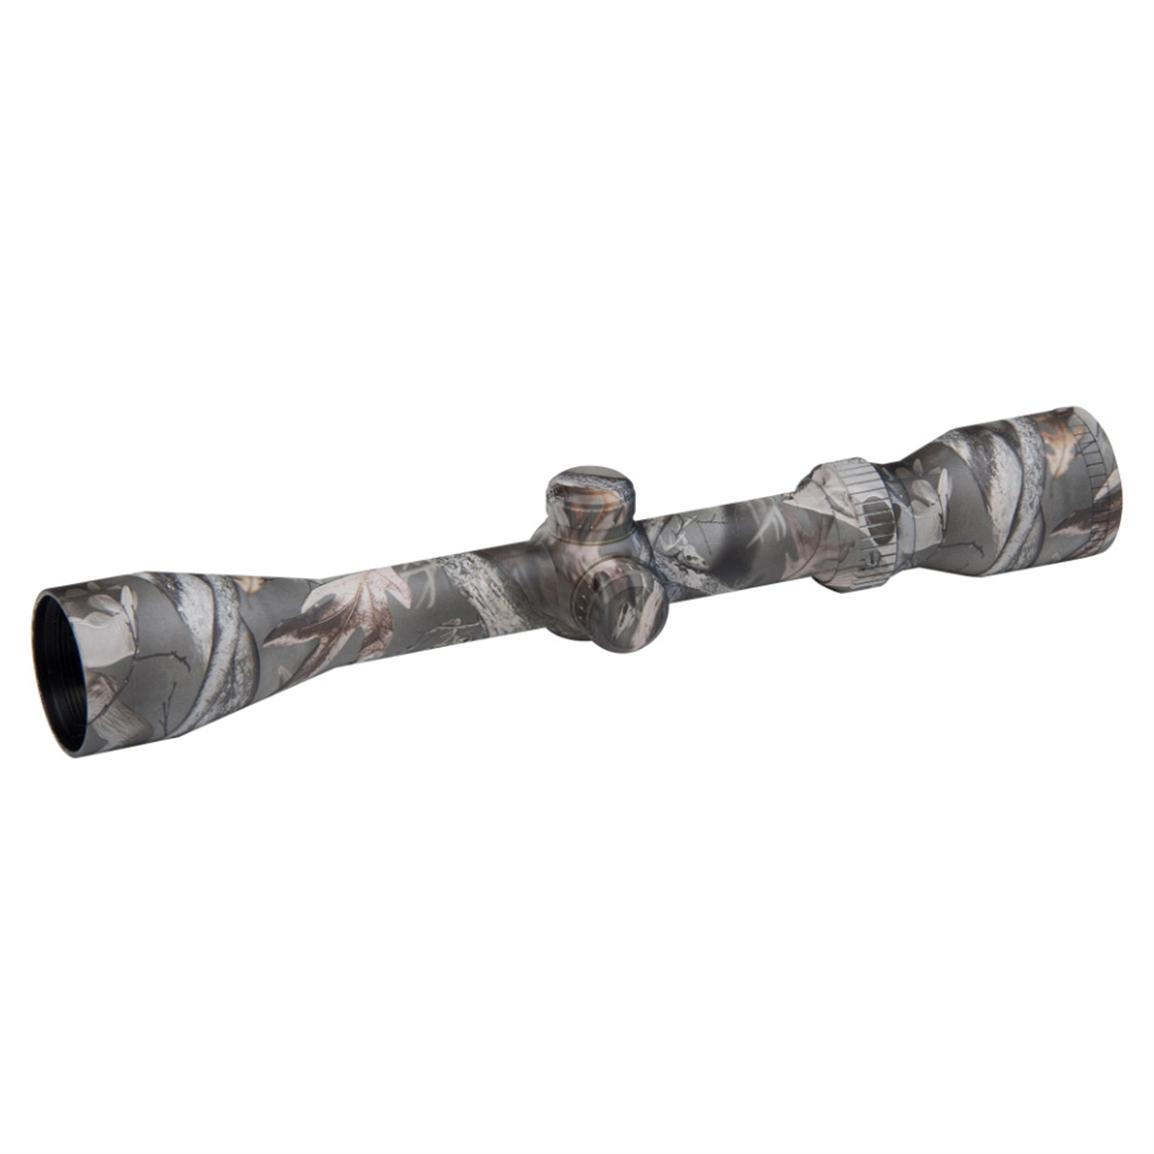 Traditions™ 3 9x40mm Muzzleloader Hunter Series Scope 233937 Free Hot